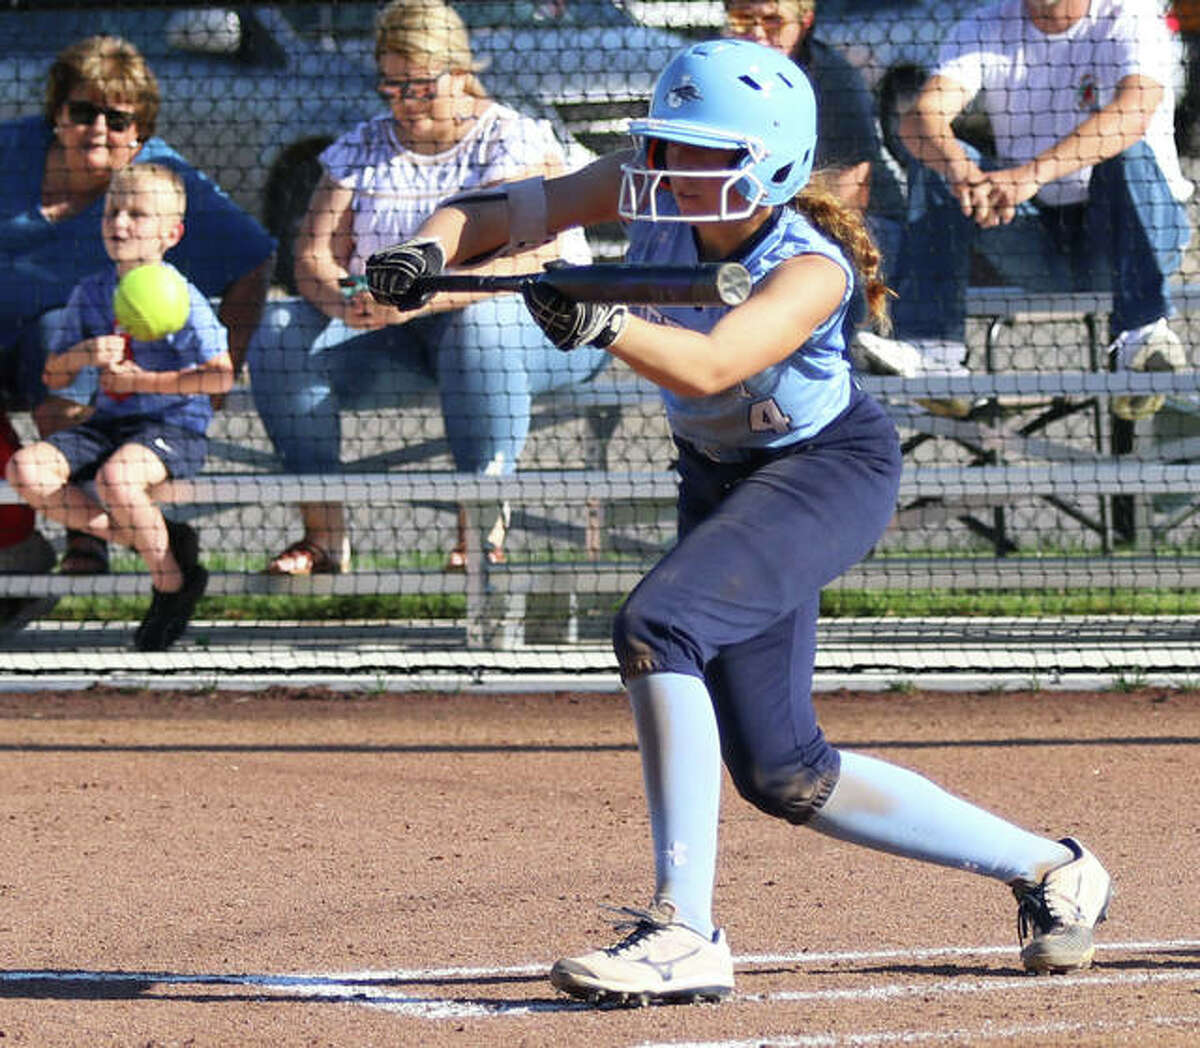 Jersey’s Bria Tuttle squares to bunt in an April 30 game against Calhoun in Jerseyville. On Monday in the fifth inning against CM, Tuttle was swinging away at home and hit a home run to spark a Panthers rally that beat the Eagles in eight innings.